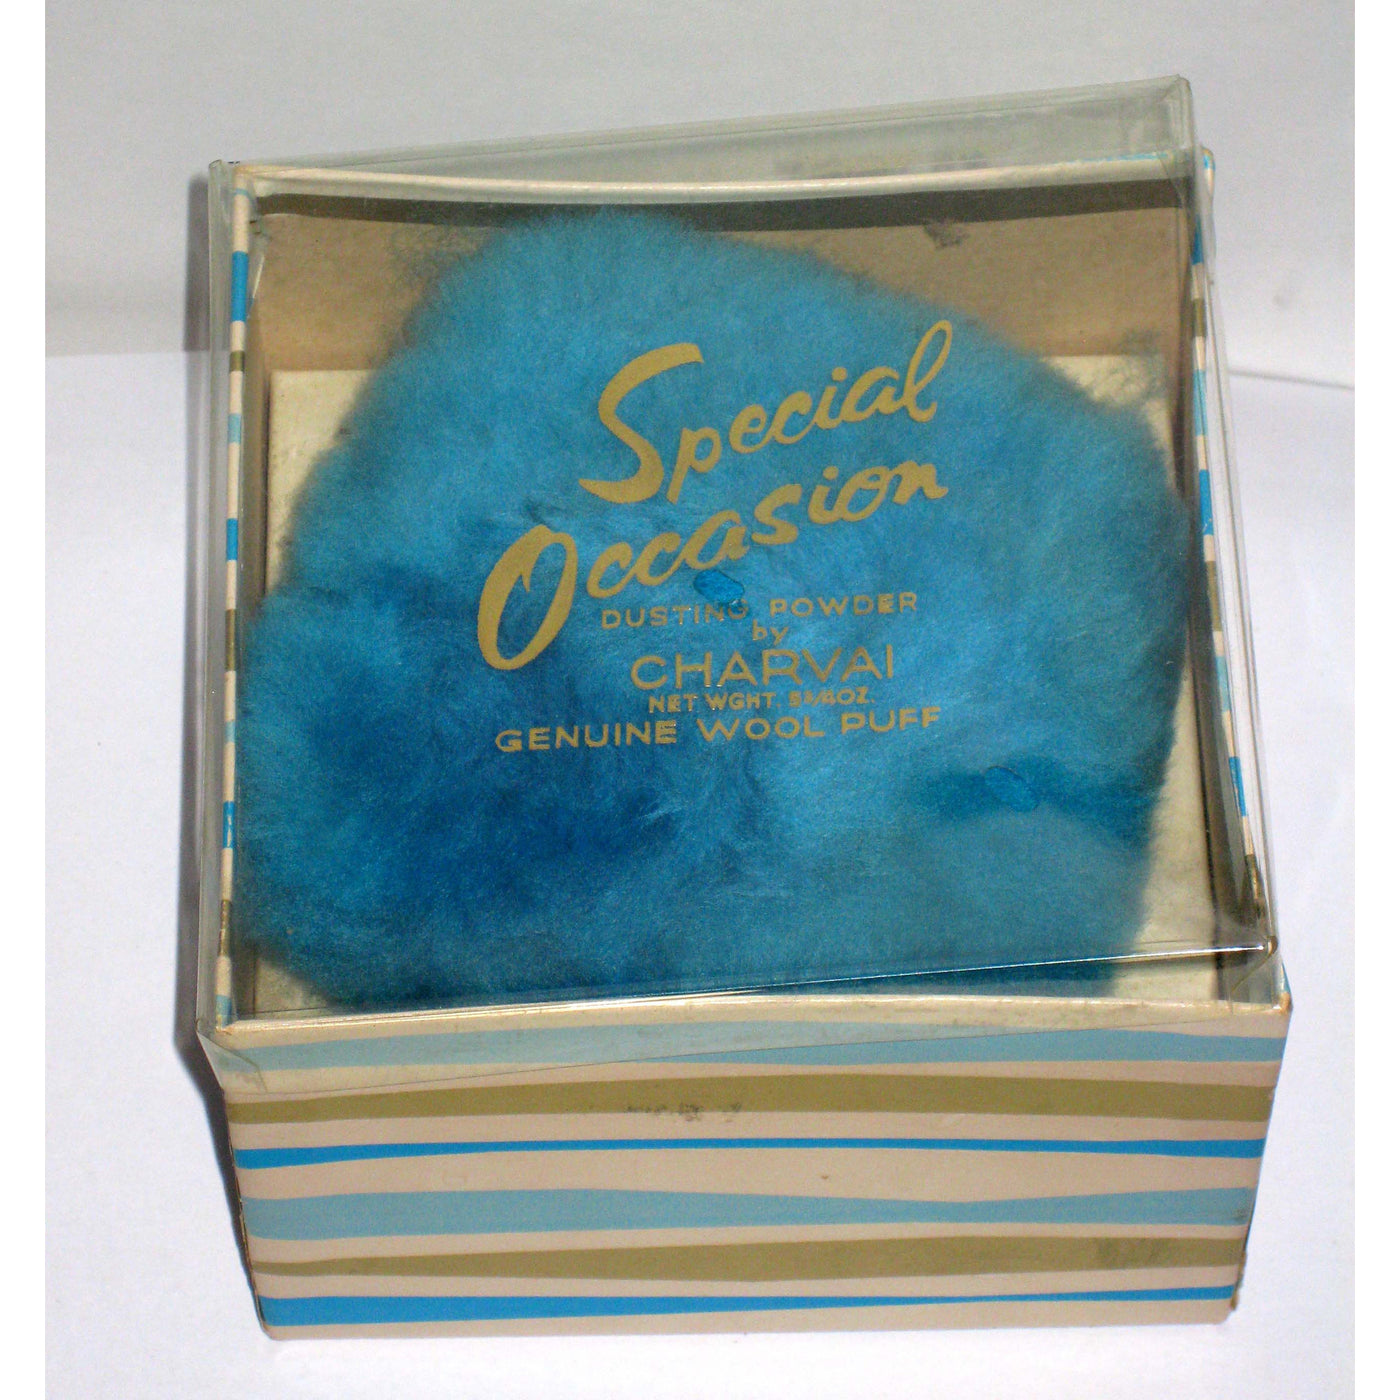 Vintage Special Occasion Dusting Powder By Charvai 